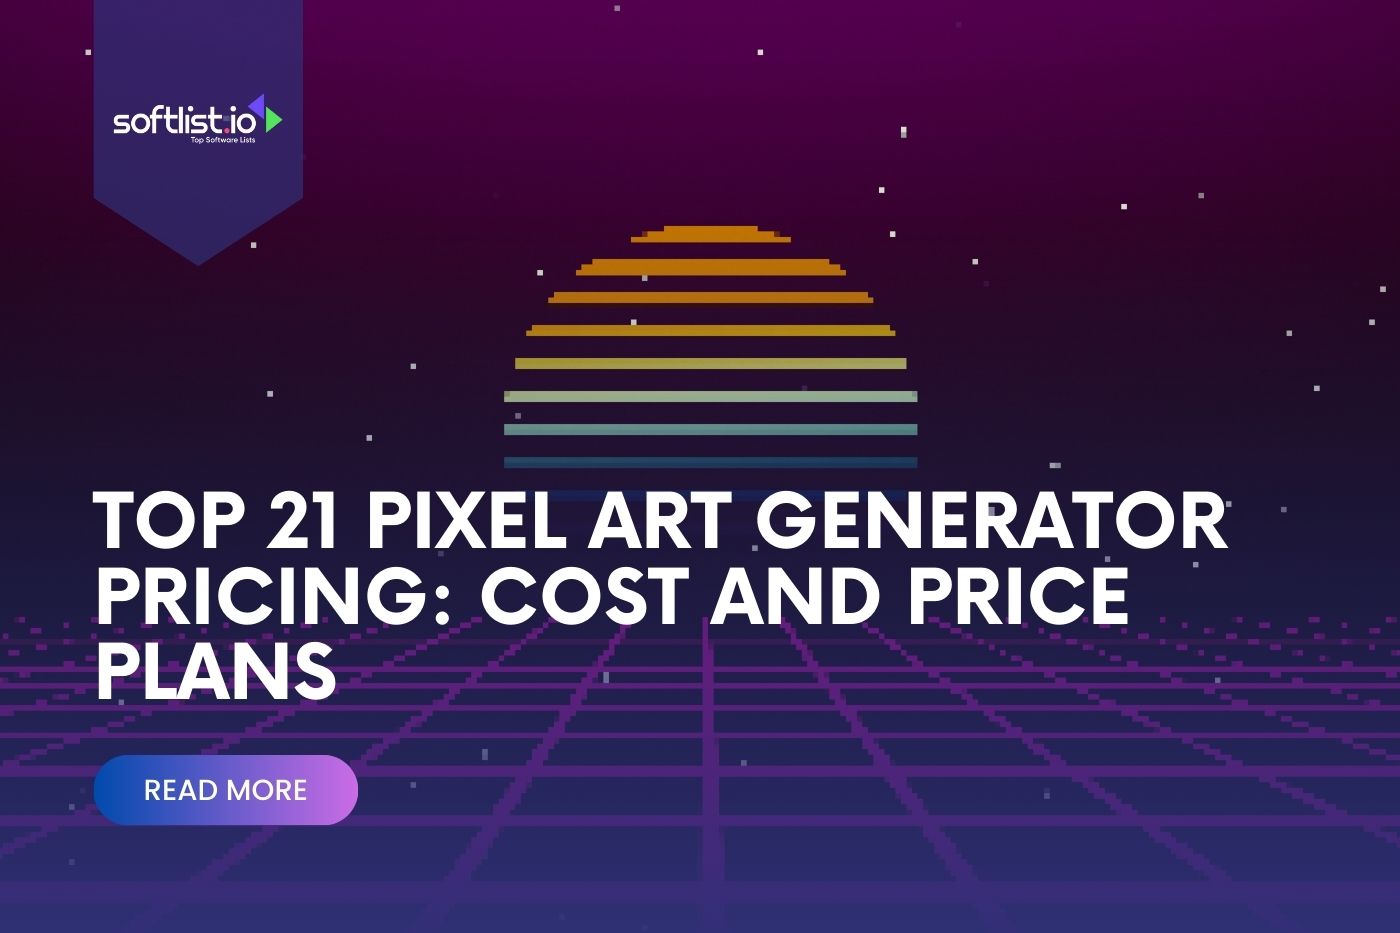 Top 21 Pixel Art Generator Pricing Cost and Price Plans